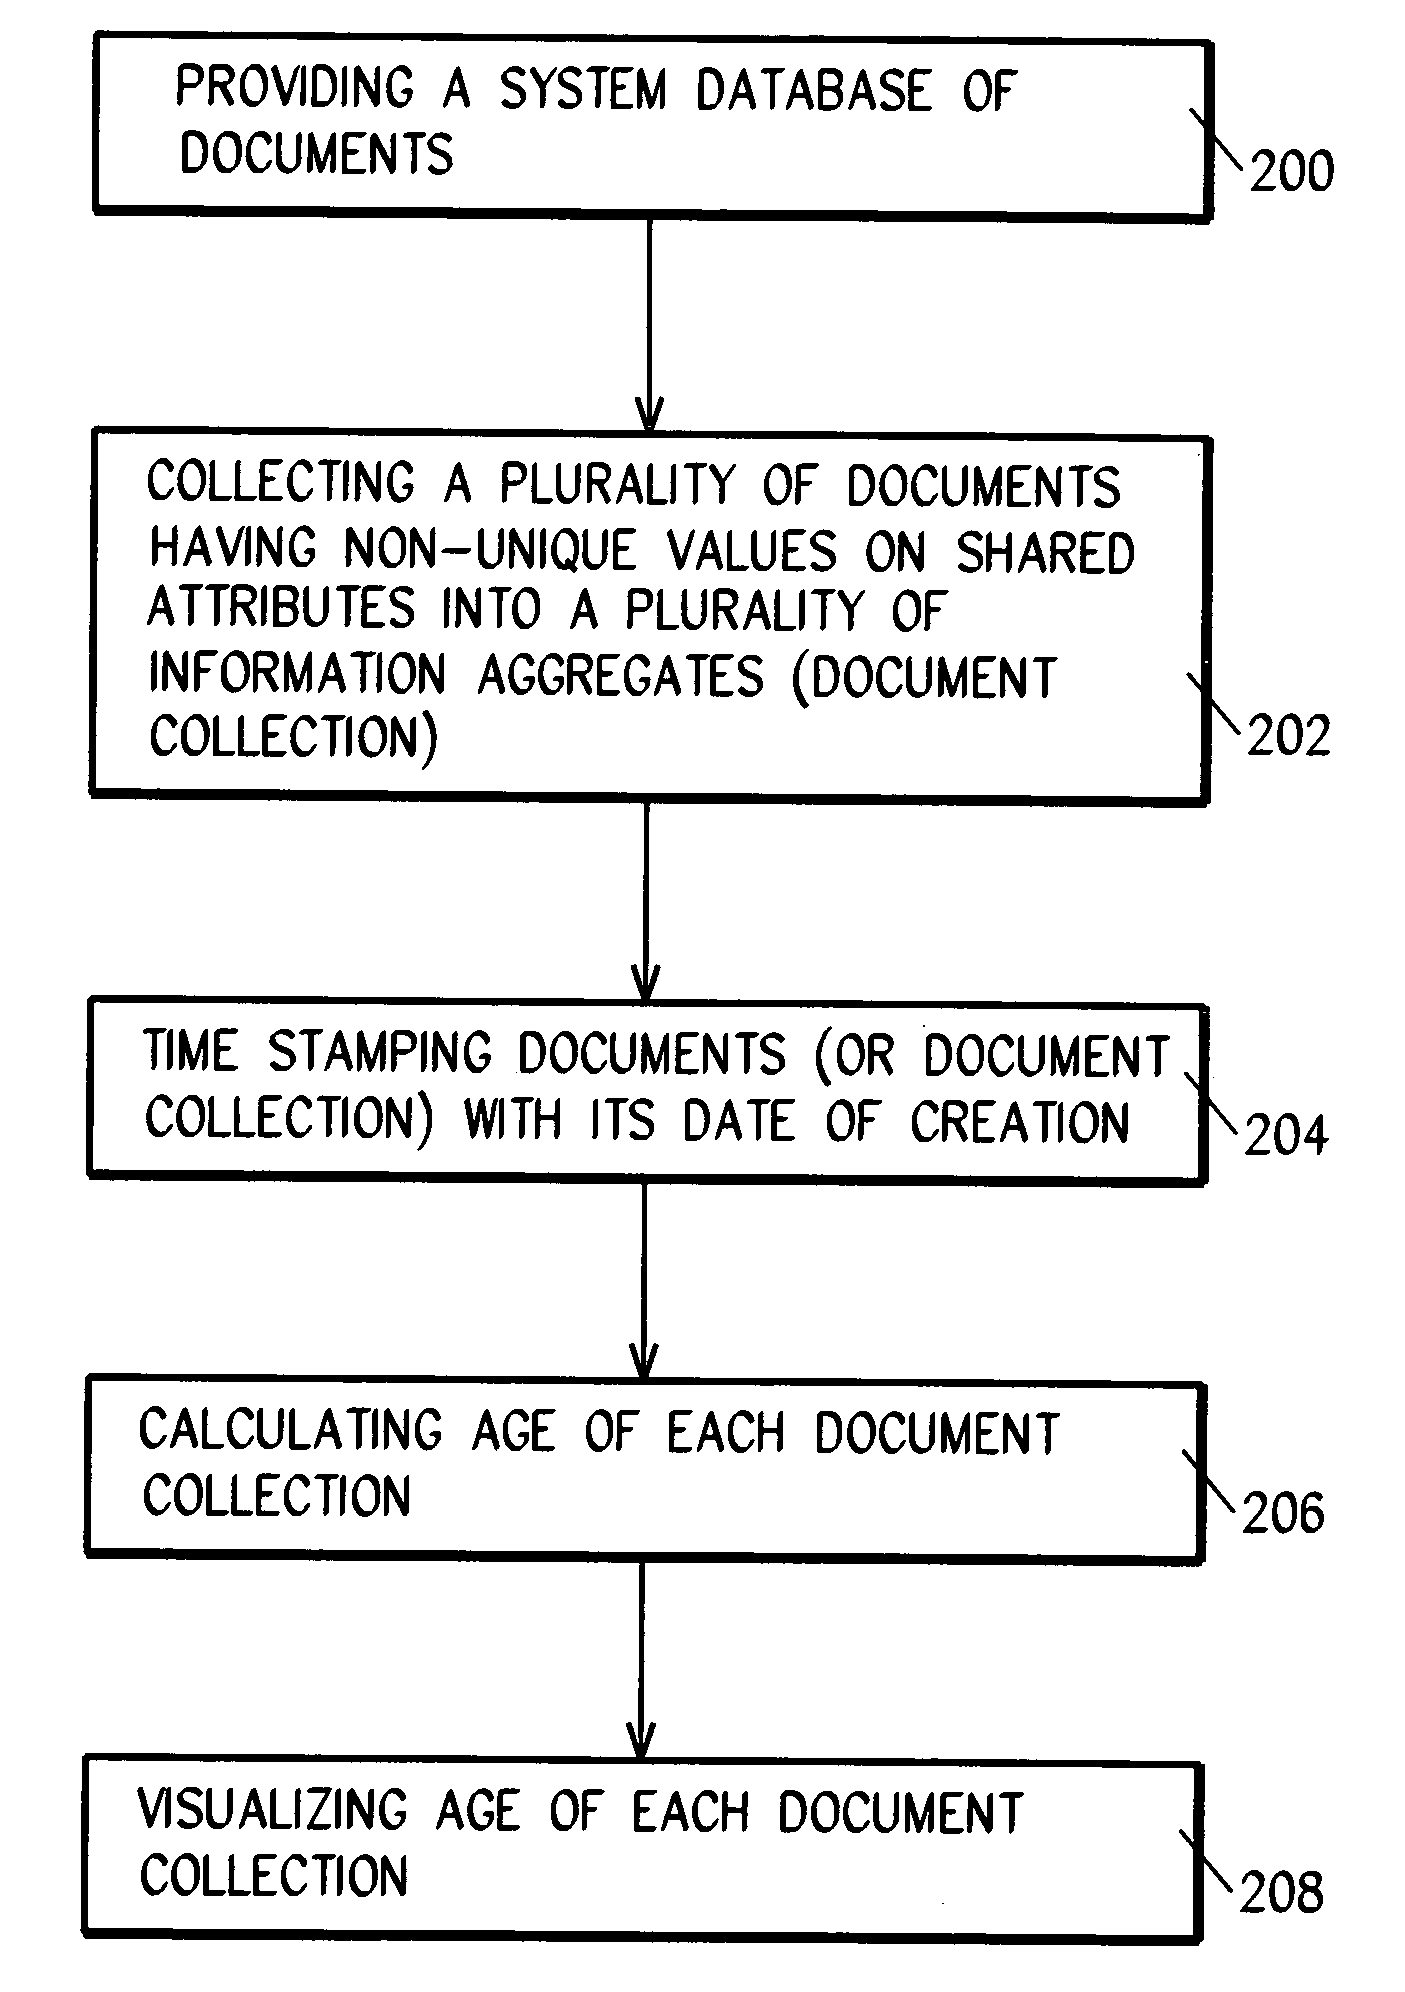 System and method for examining, calculating the age of an document collection as a measure of time since creation, visualizing, identifying selectively reference those document collections representing current activity